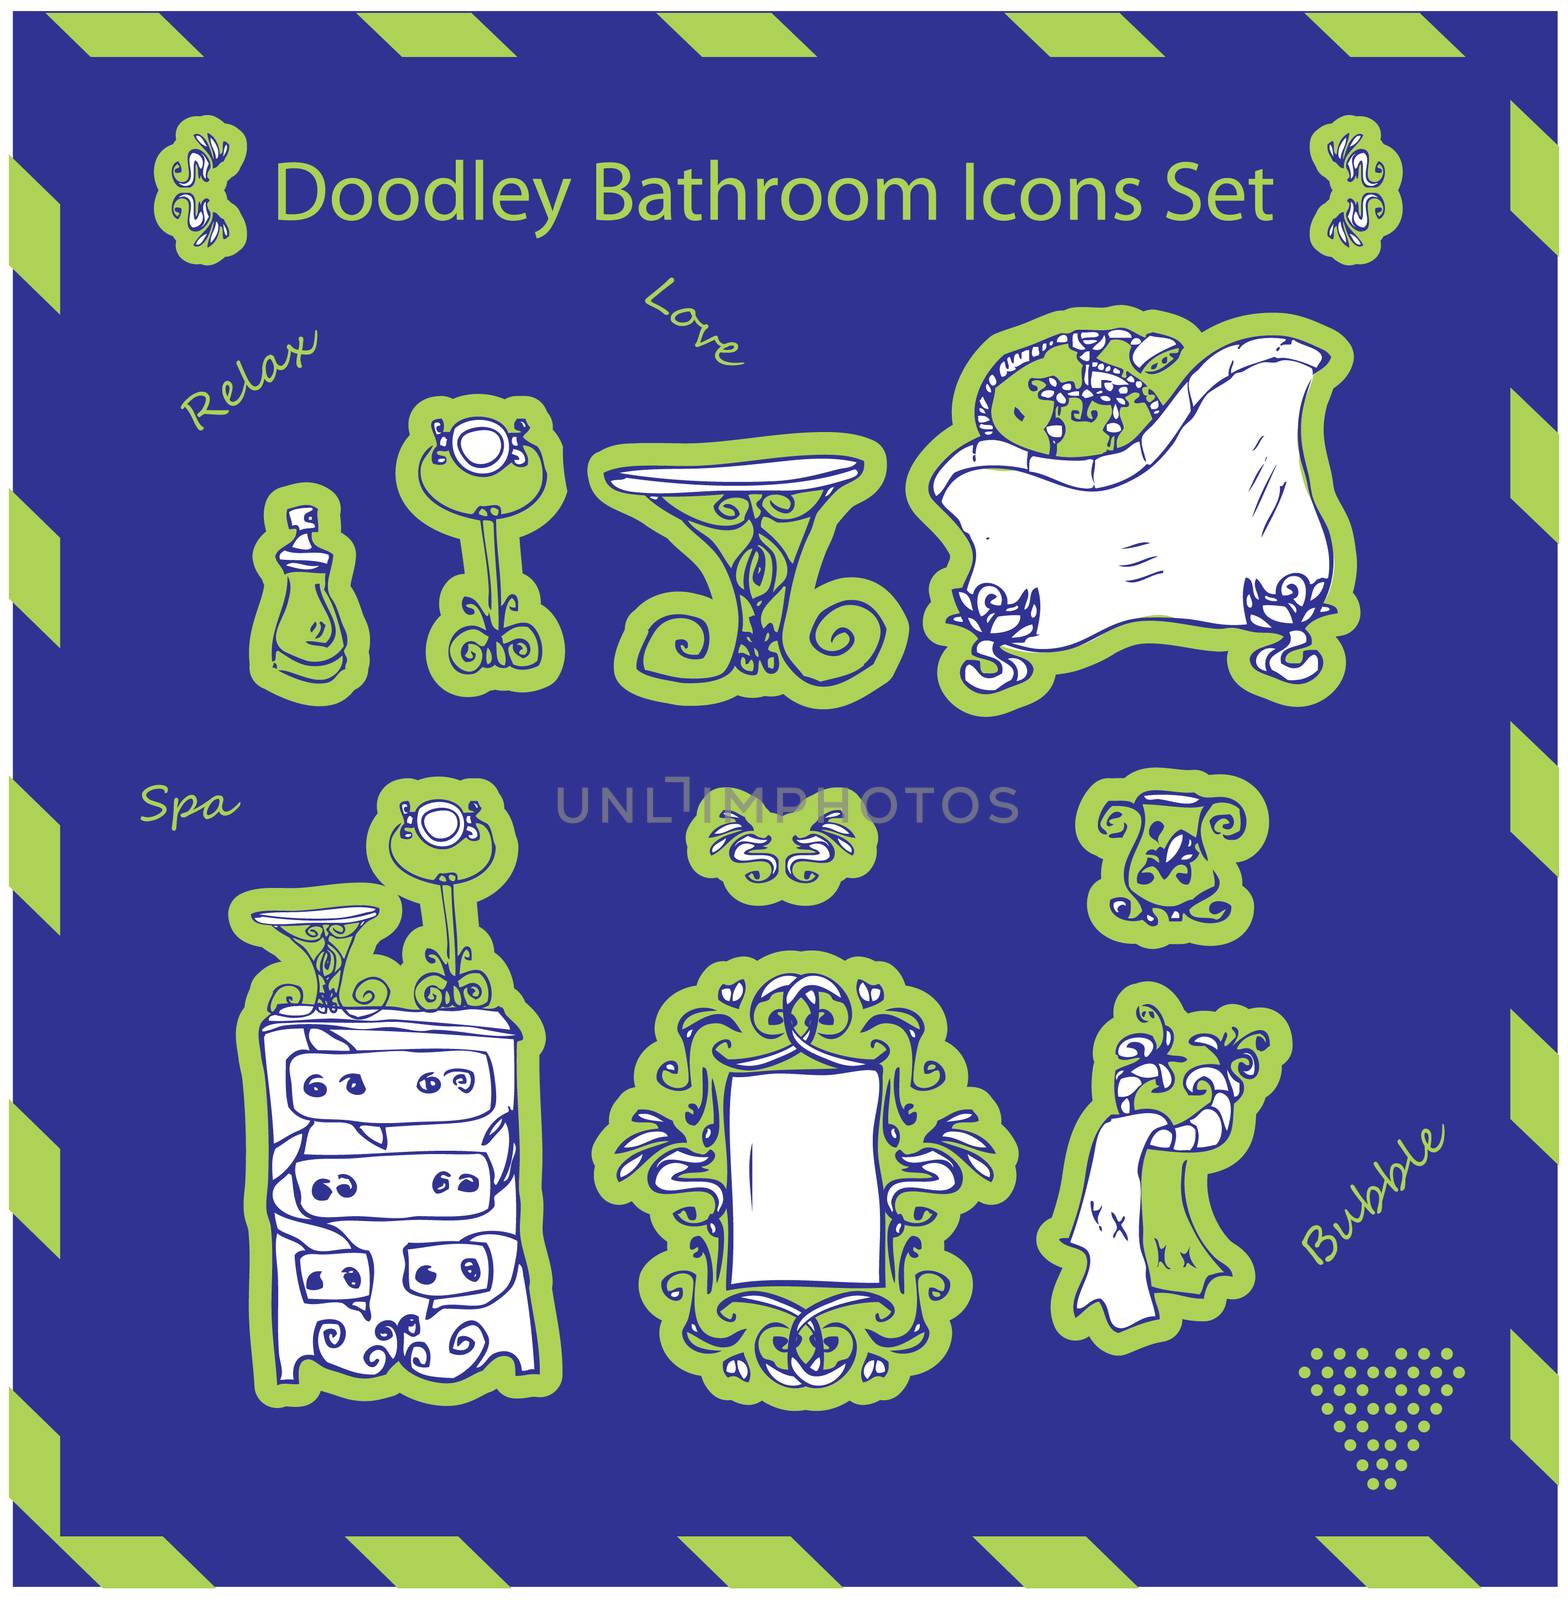  bathroom icons set doodley stickers template